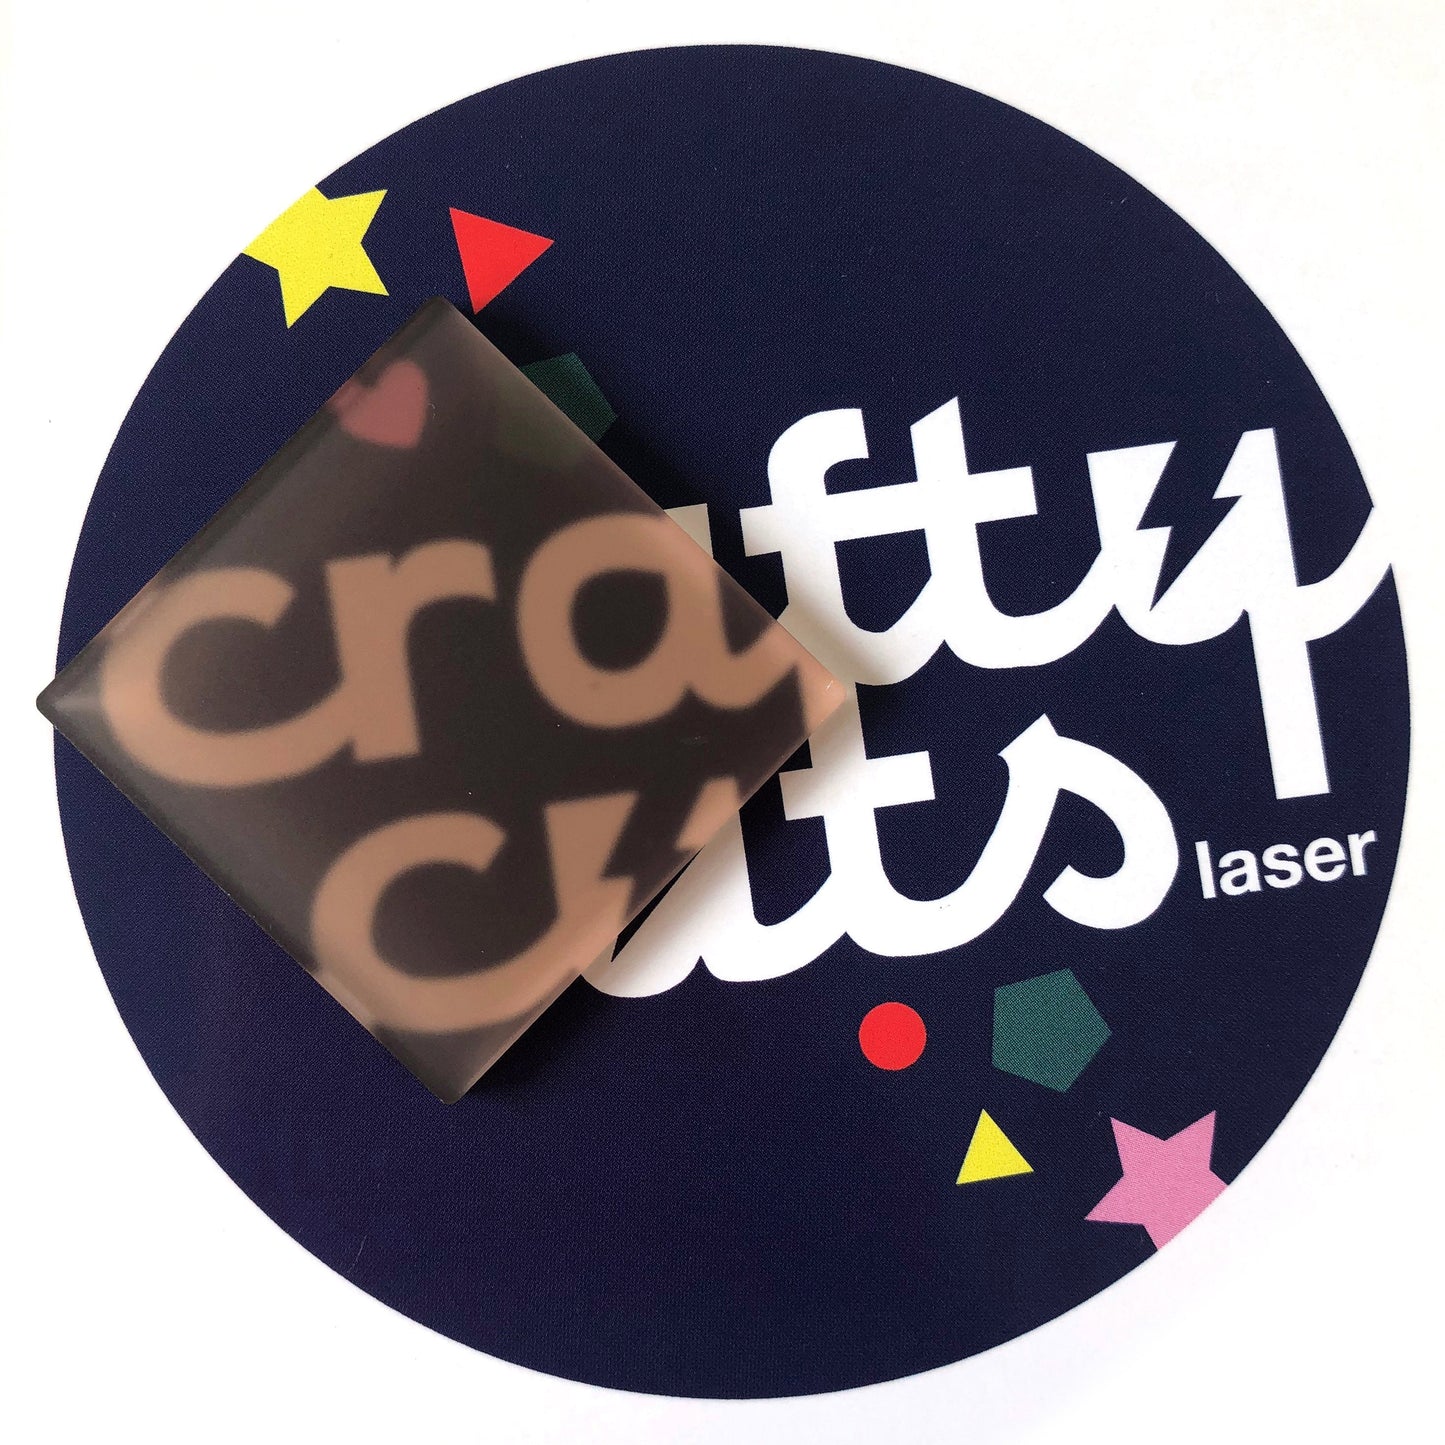 Crafty Cuts Laser Pty Ltd Materials Frosted Acrylic - Cookie